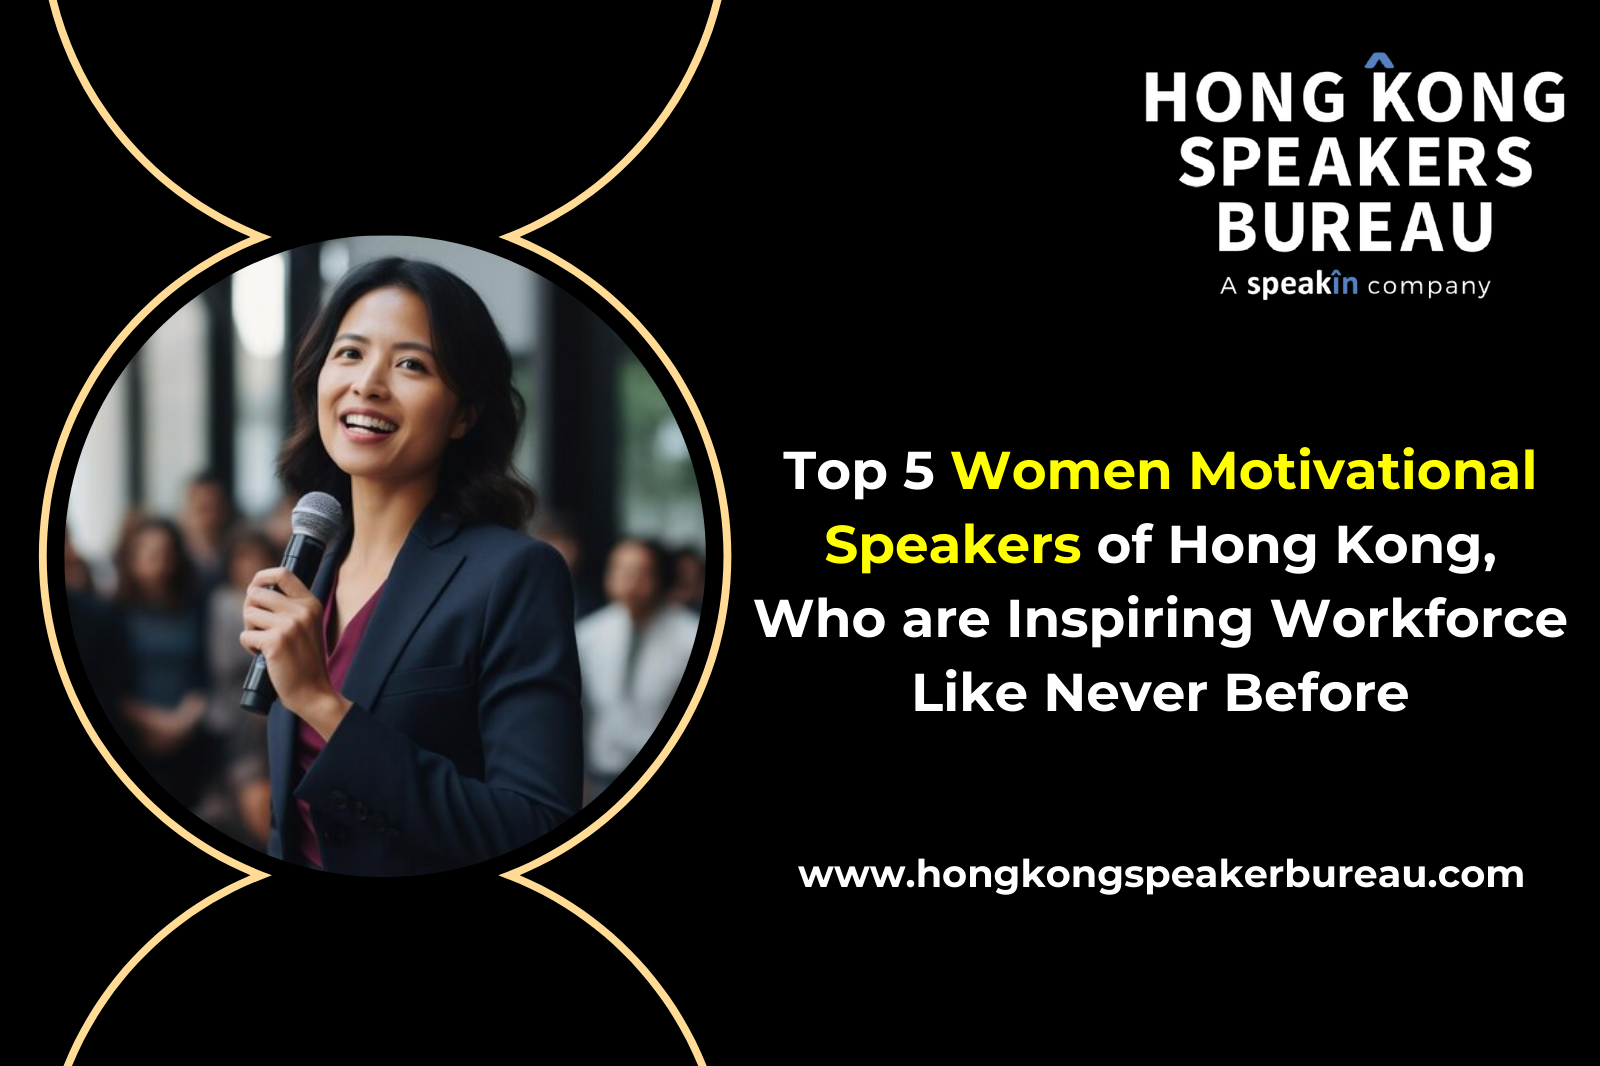 Top 5 Women Motivational Speakers of Hong Kong, Who are Inspiring Workforce Like Never Before